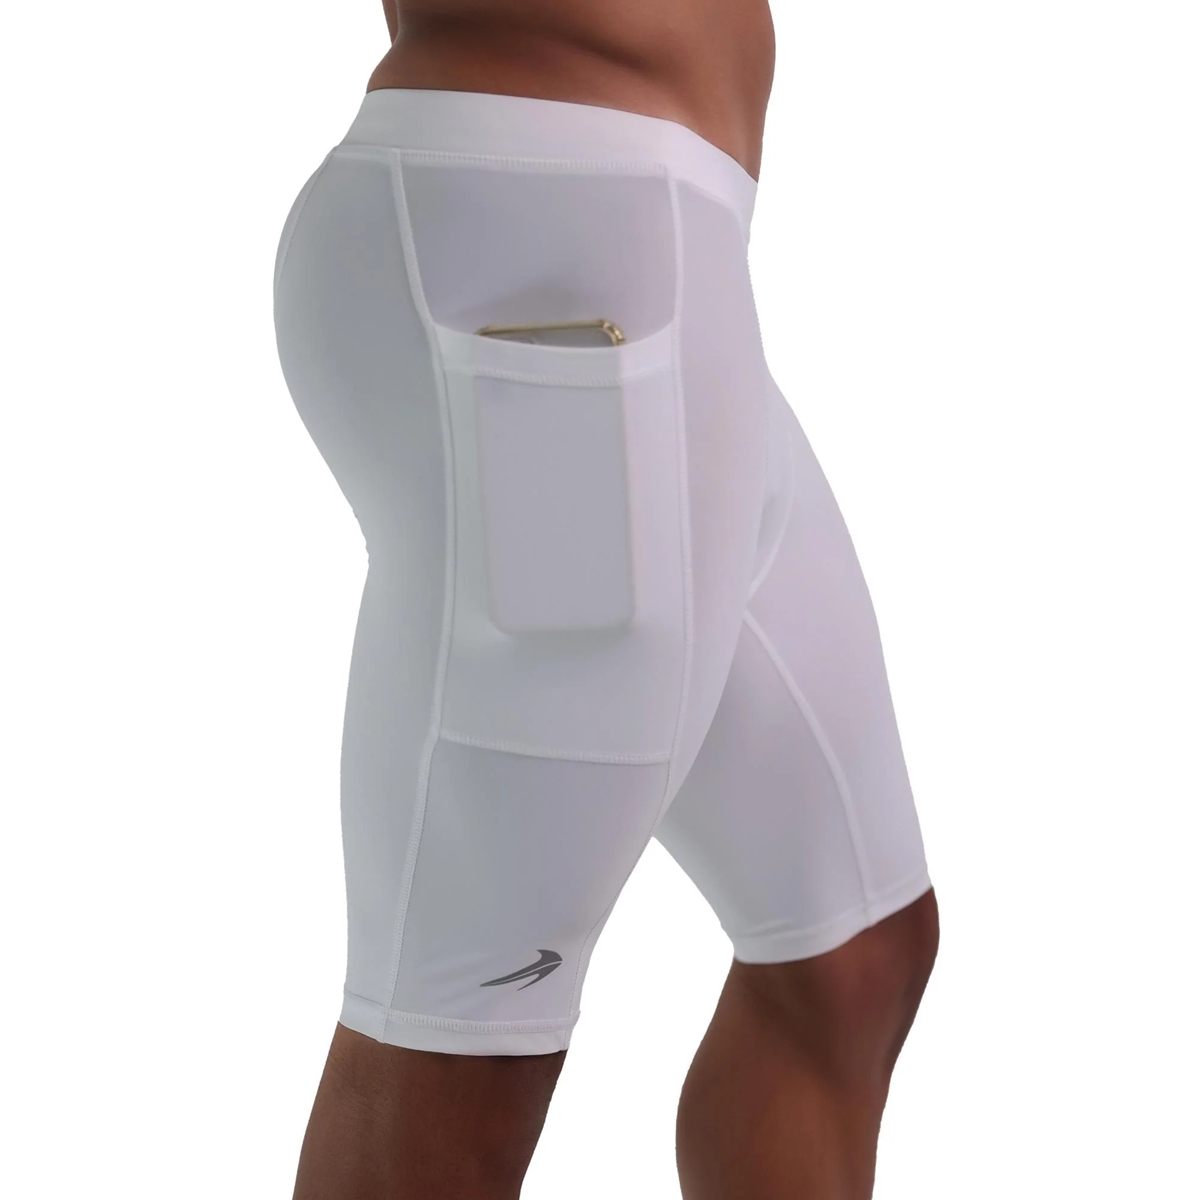 10 Best Men’s White Compression Shorts For 2023